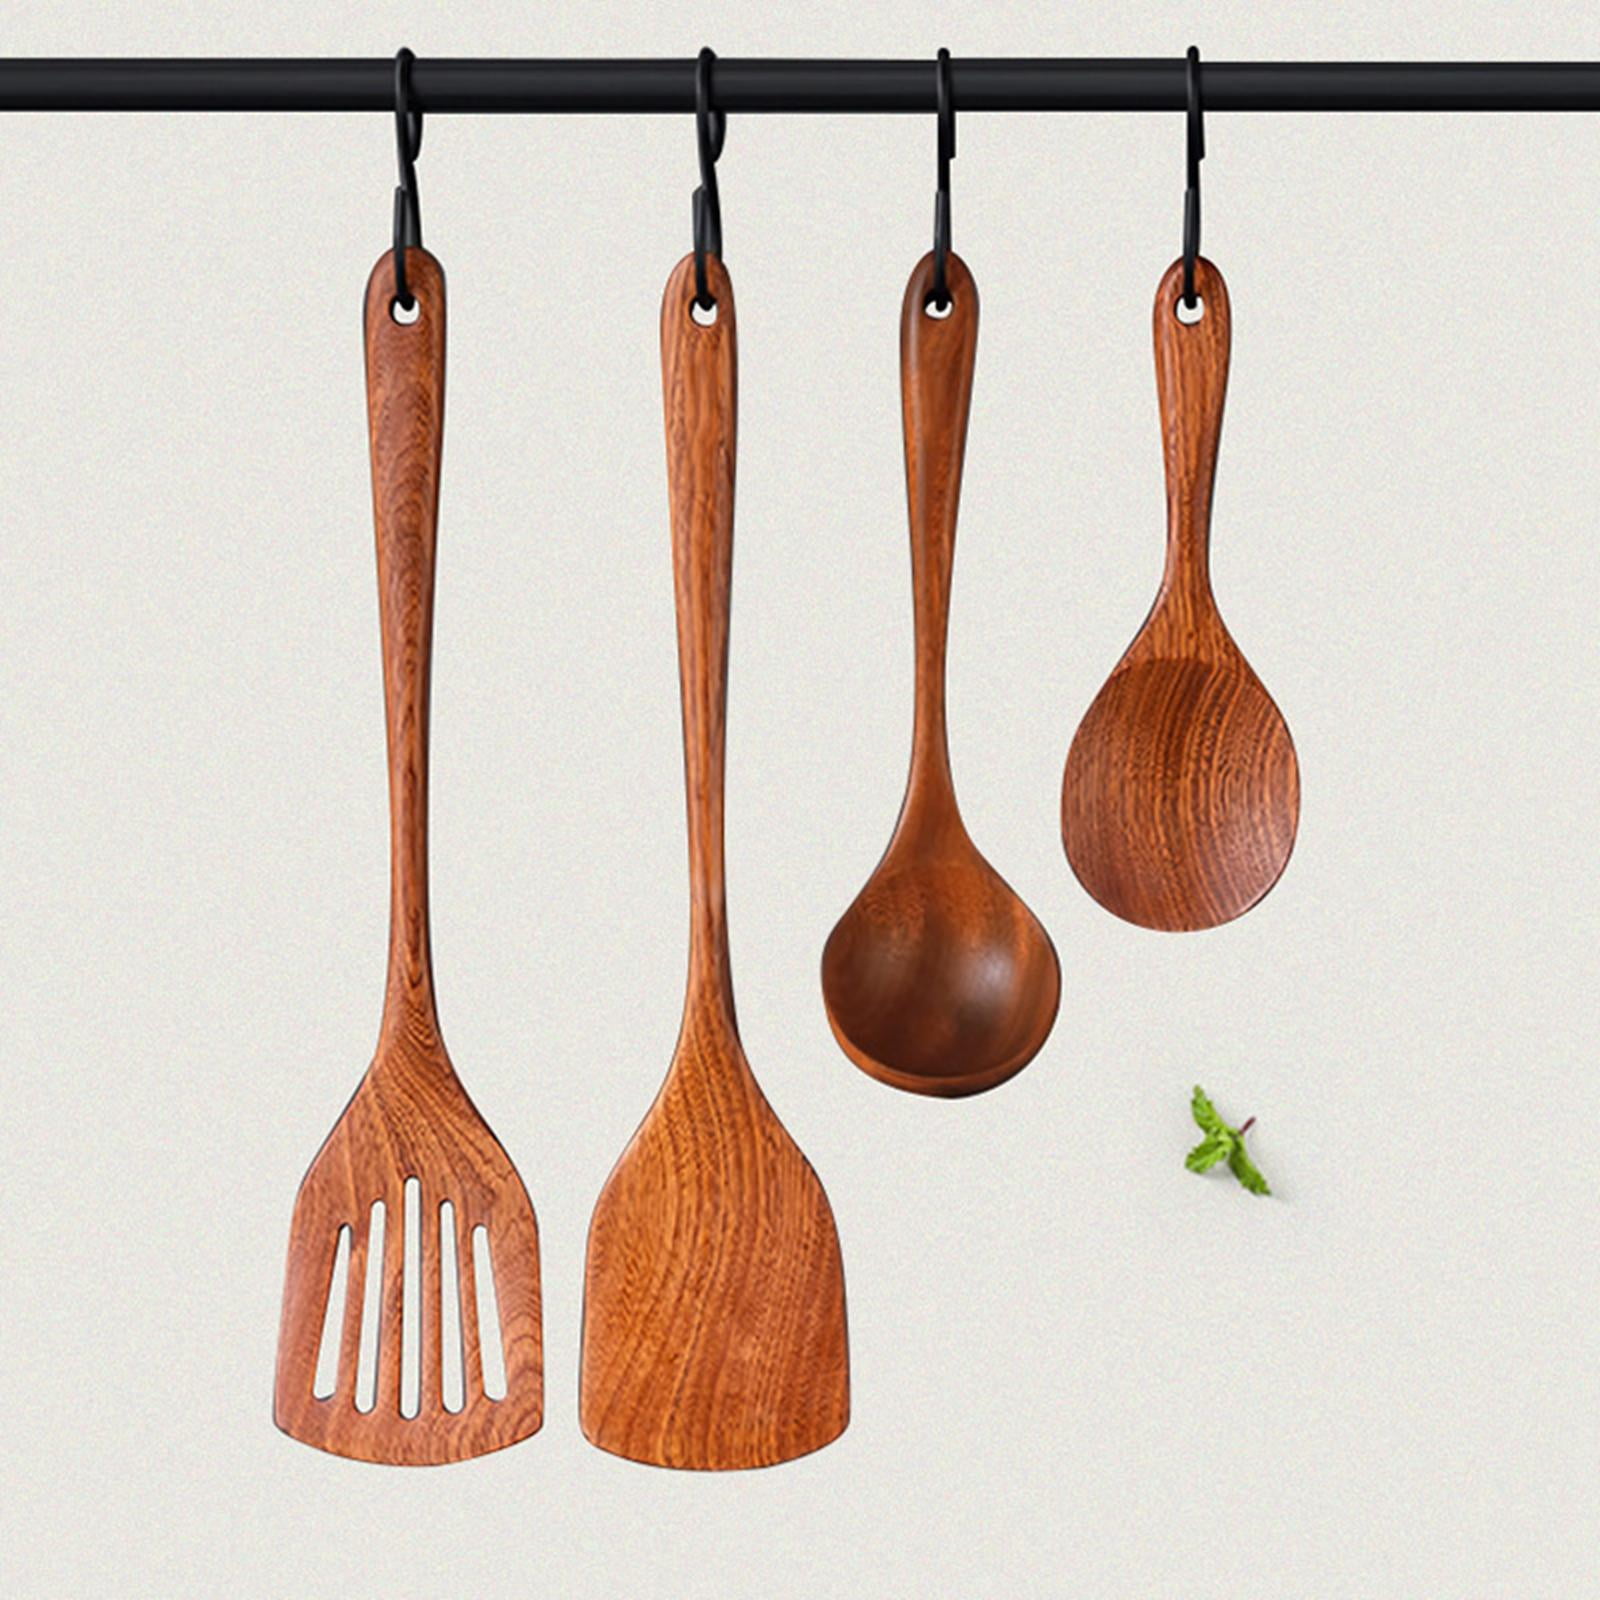 Yunhigh Set of Wooden Cooking Spoons And Spatula Shovel Rice Soup Spoon Wood Non-Stick Kitchen Utensils Japanese Style（4pcs） 